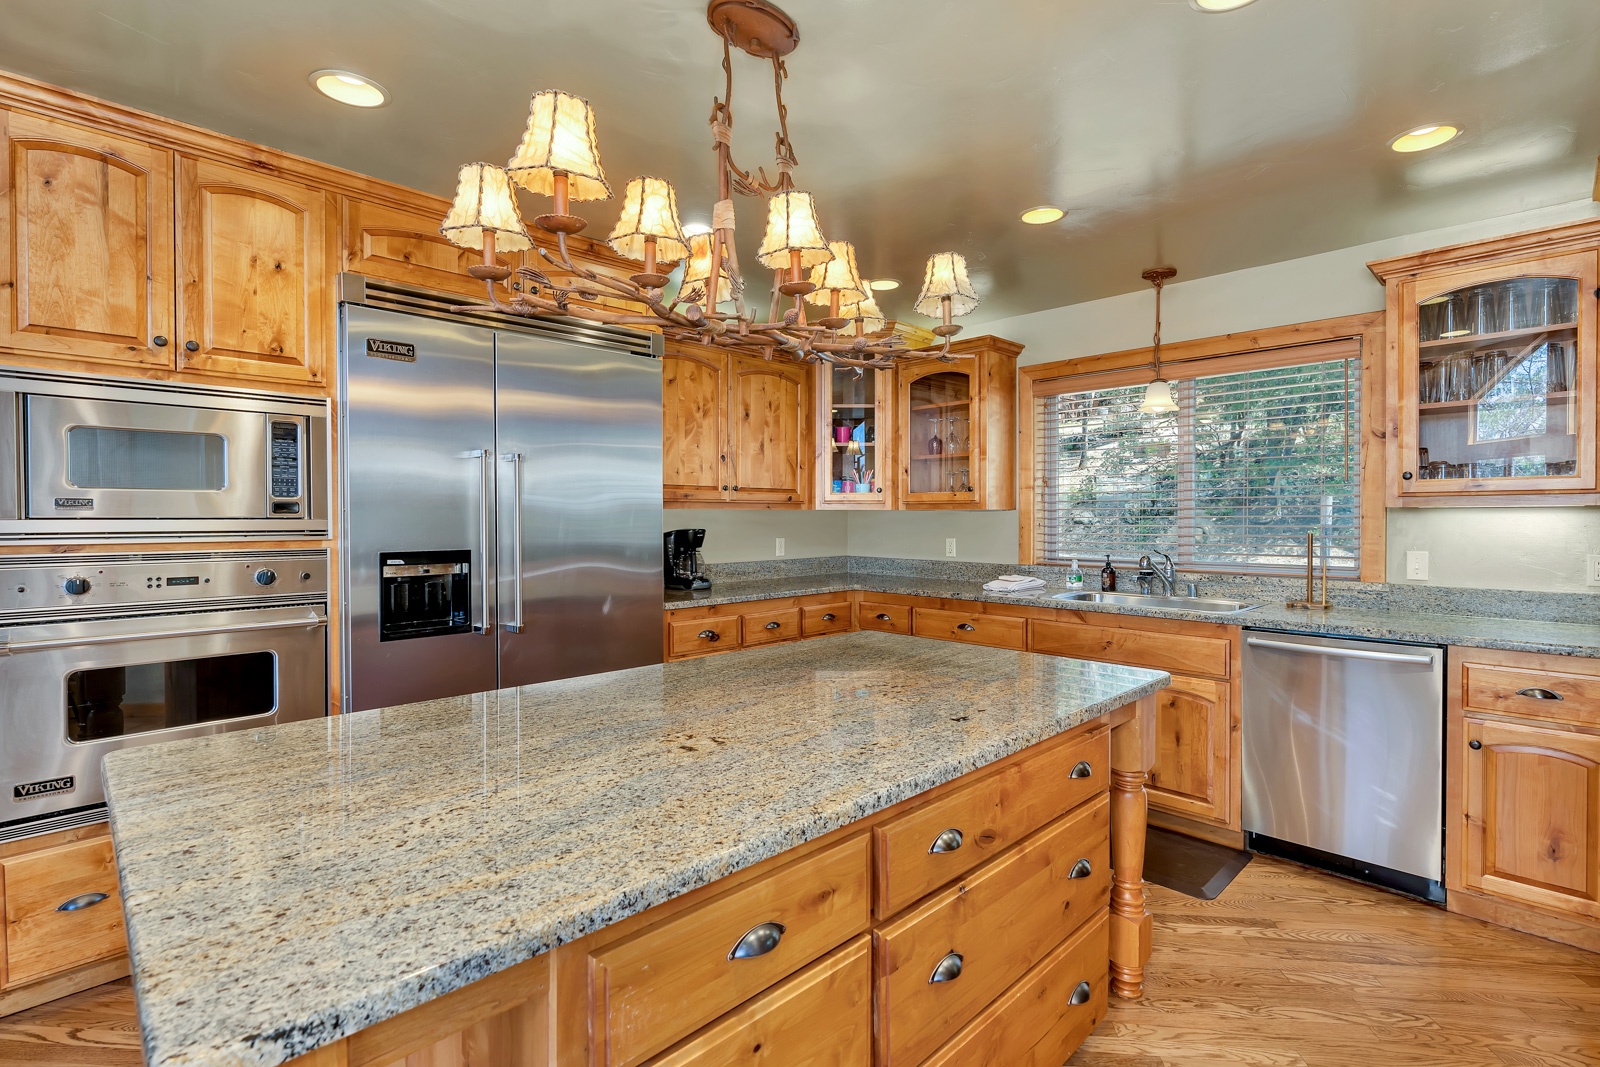 The kitchen is a chef’s dream, offering space & top-tier appliances/amenities